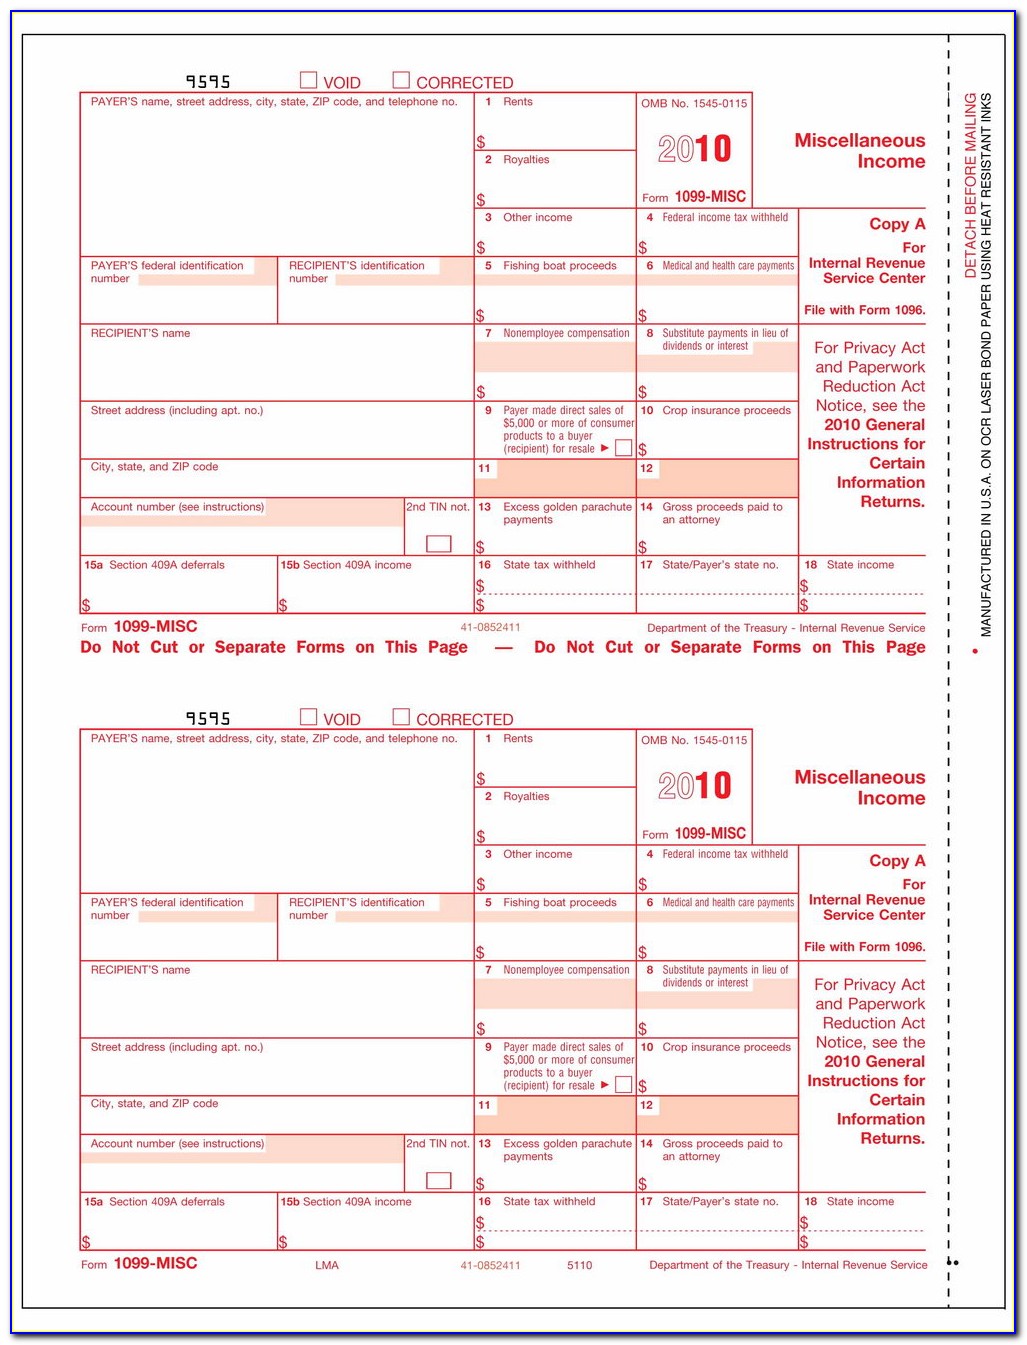 Irs Address For 1099 Misc Forms